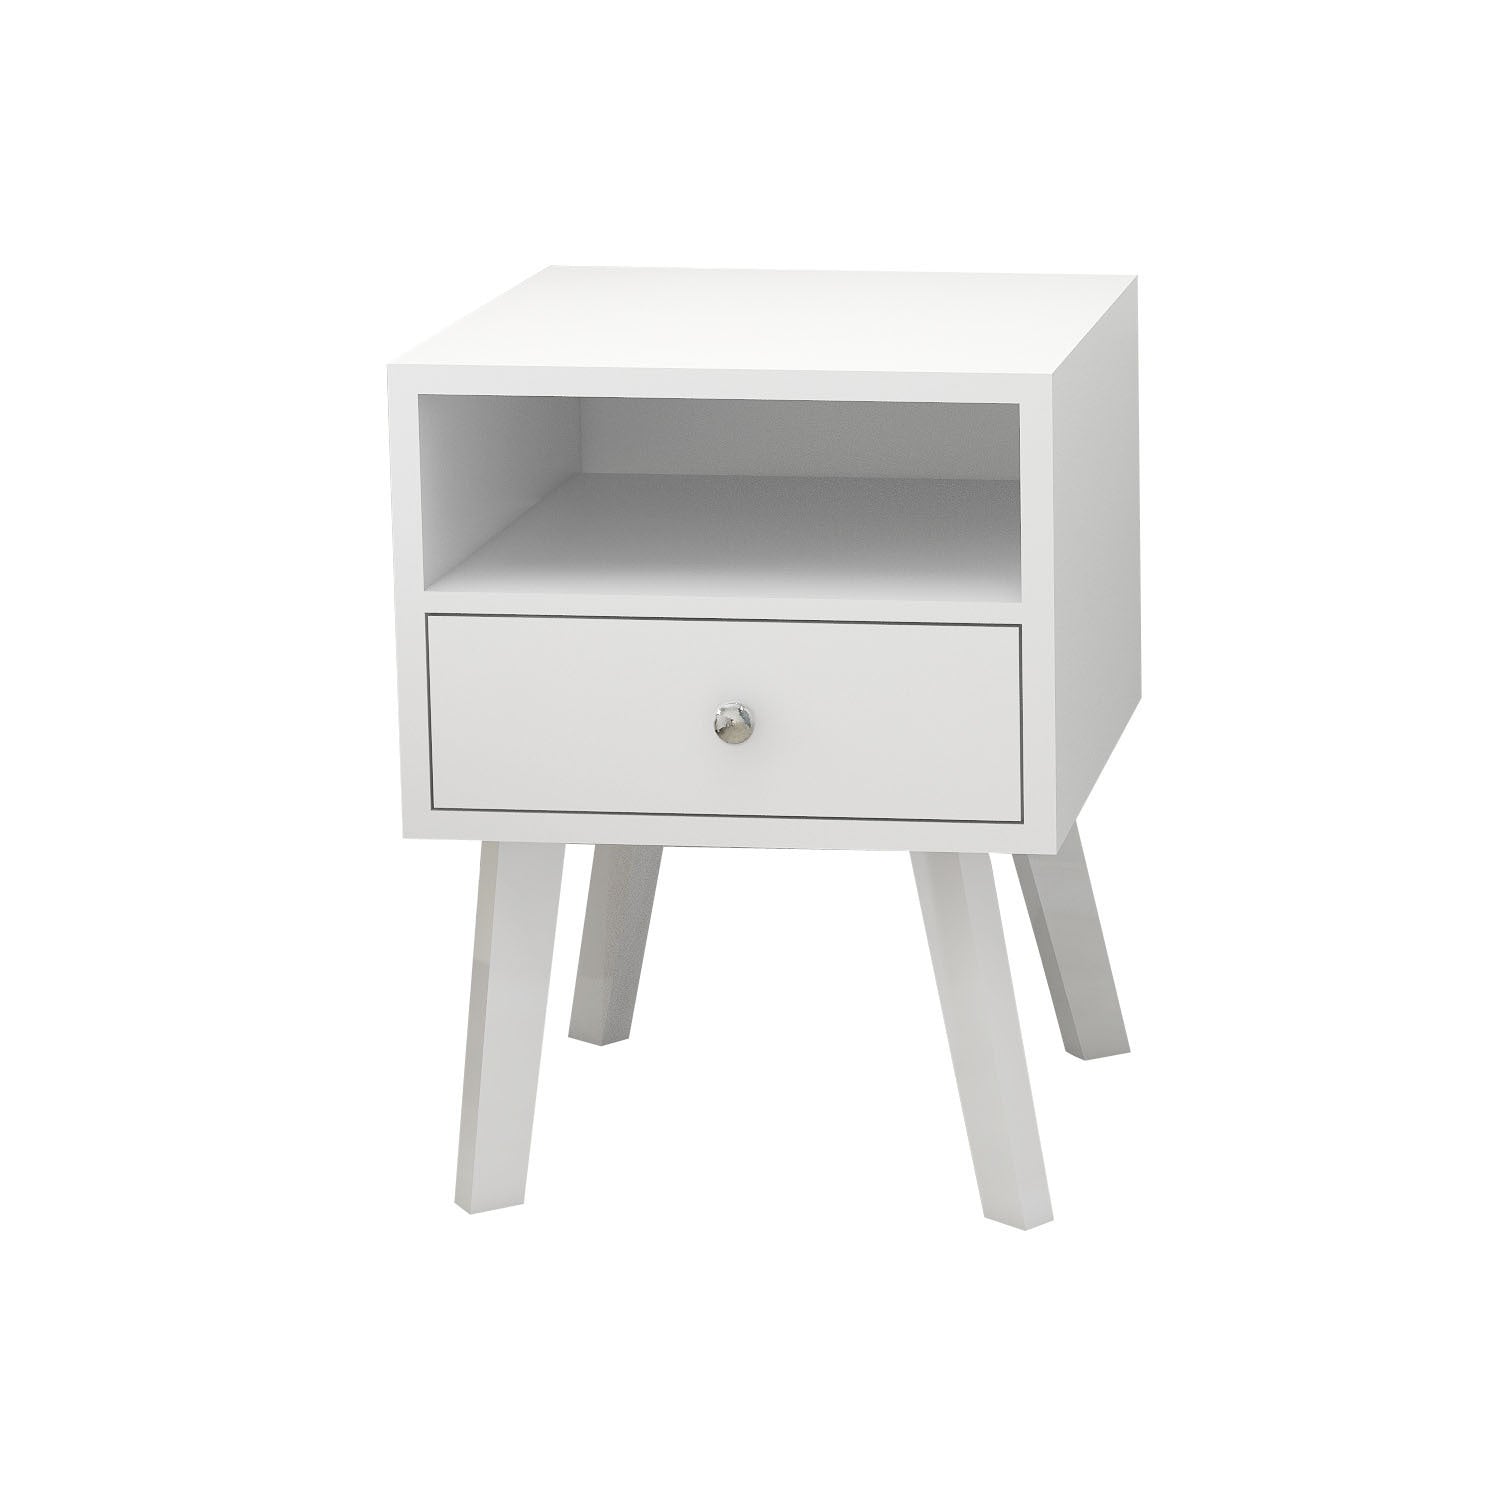 Mid-Century Modern Bedside Table (White)